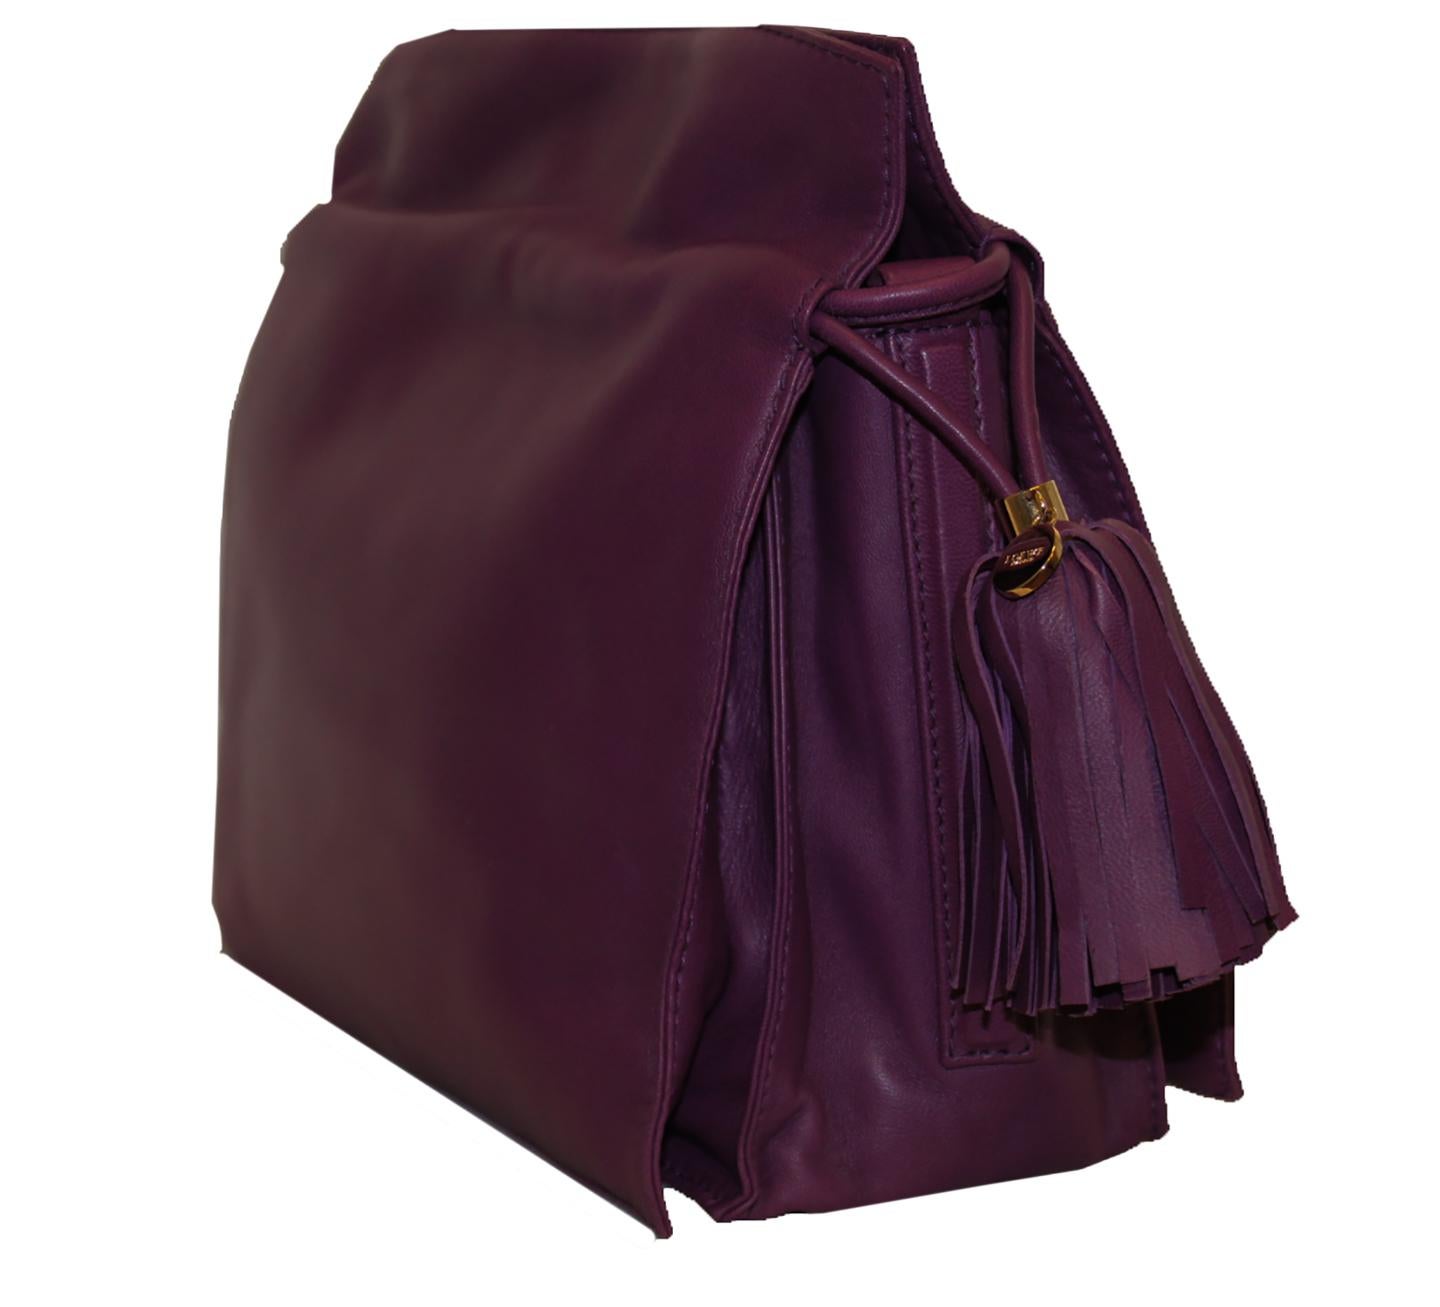 Loewe purple lambskin leather Flamenco bag with top handles incorporates a large tassel on each side with a drawstring for closure.  This bag opens to 3 compartments that are lined in beige linen and cotton.  One of the compartments includes a side